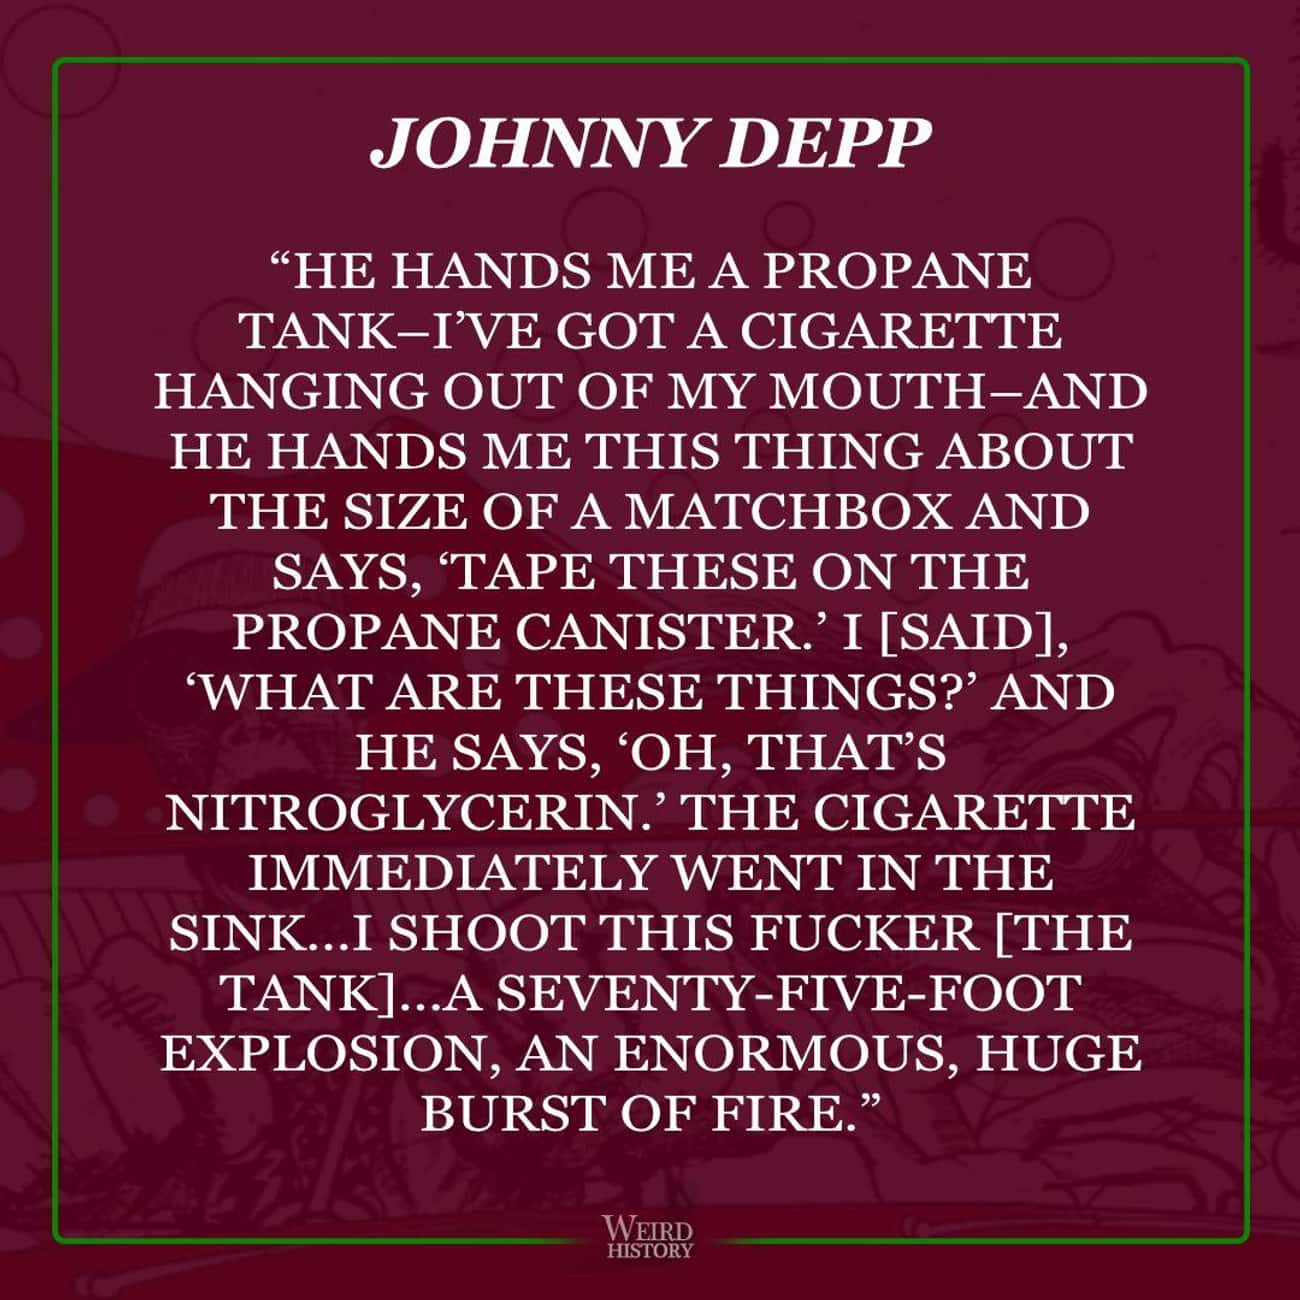 He And Johnny Depp Played With Nitroglycerin